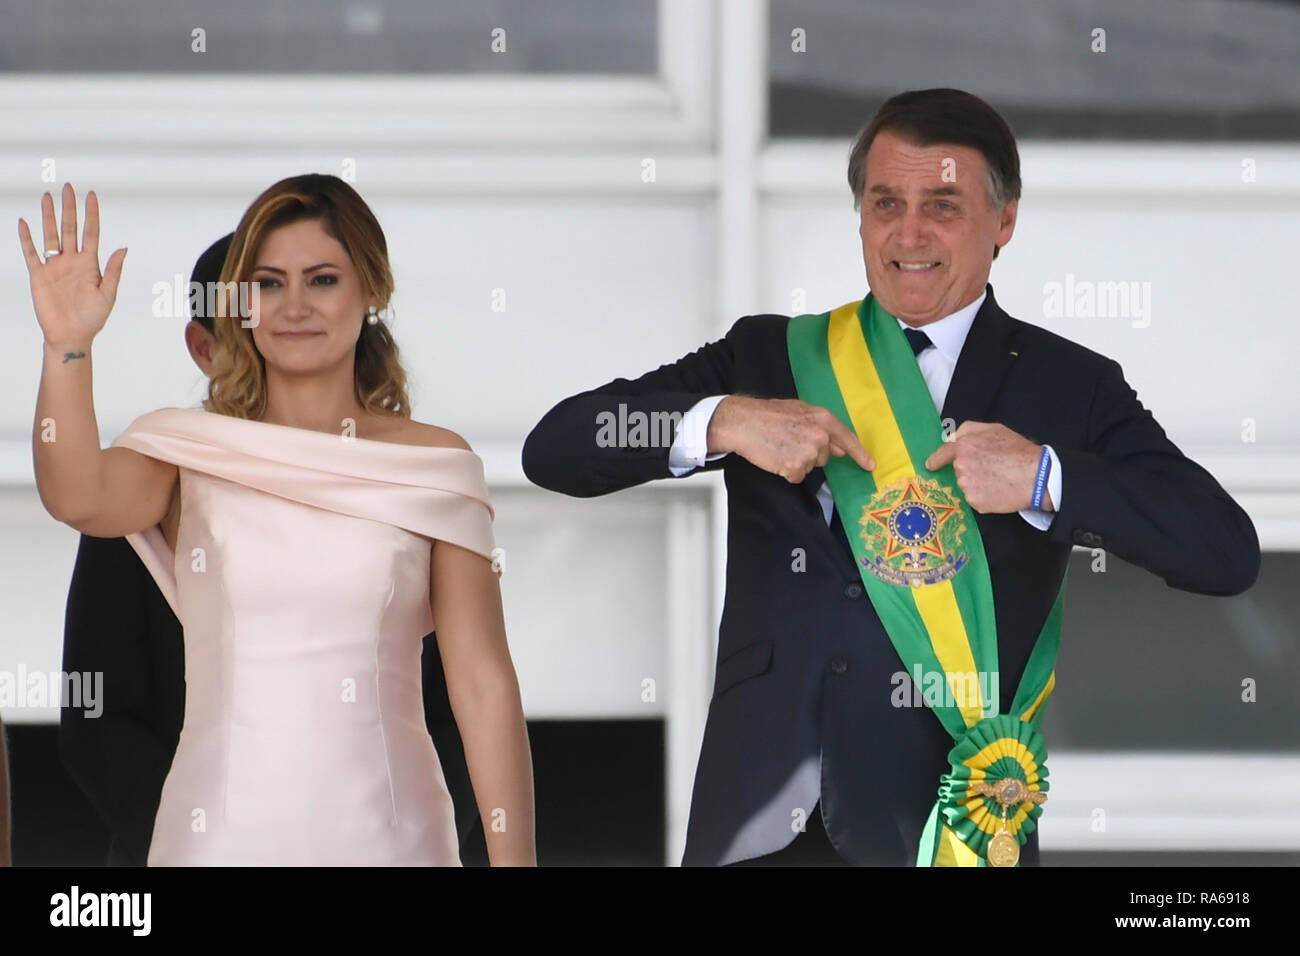 Brasilia, Brazil. 1st January, 2019. The President of the Republic of Brazil, Jair Bolsonaro, already with the presidential banner, accompanied by the first lady Michelle Bolsonaro during a ceremony of inauguration in the Palace of the Planalto in this Tuesday, January 1, 2019 in Brasilia. Photo: Mateus Bonomi / AGIF Credit: AGIF/Alamy Live News Stock Photo